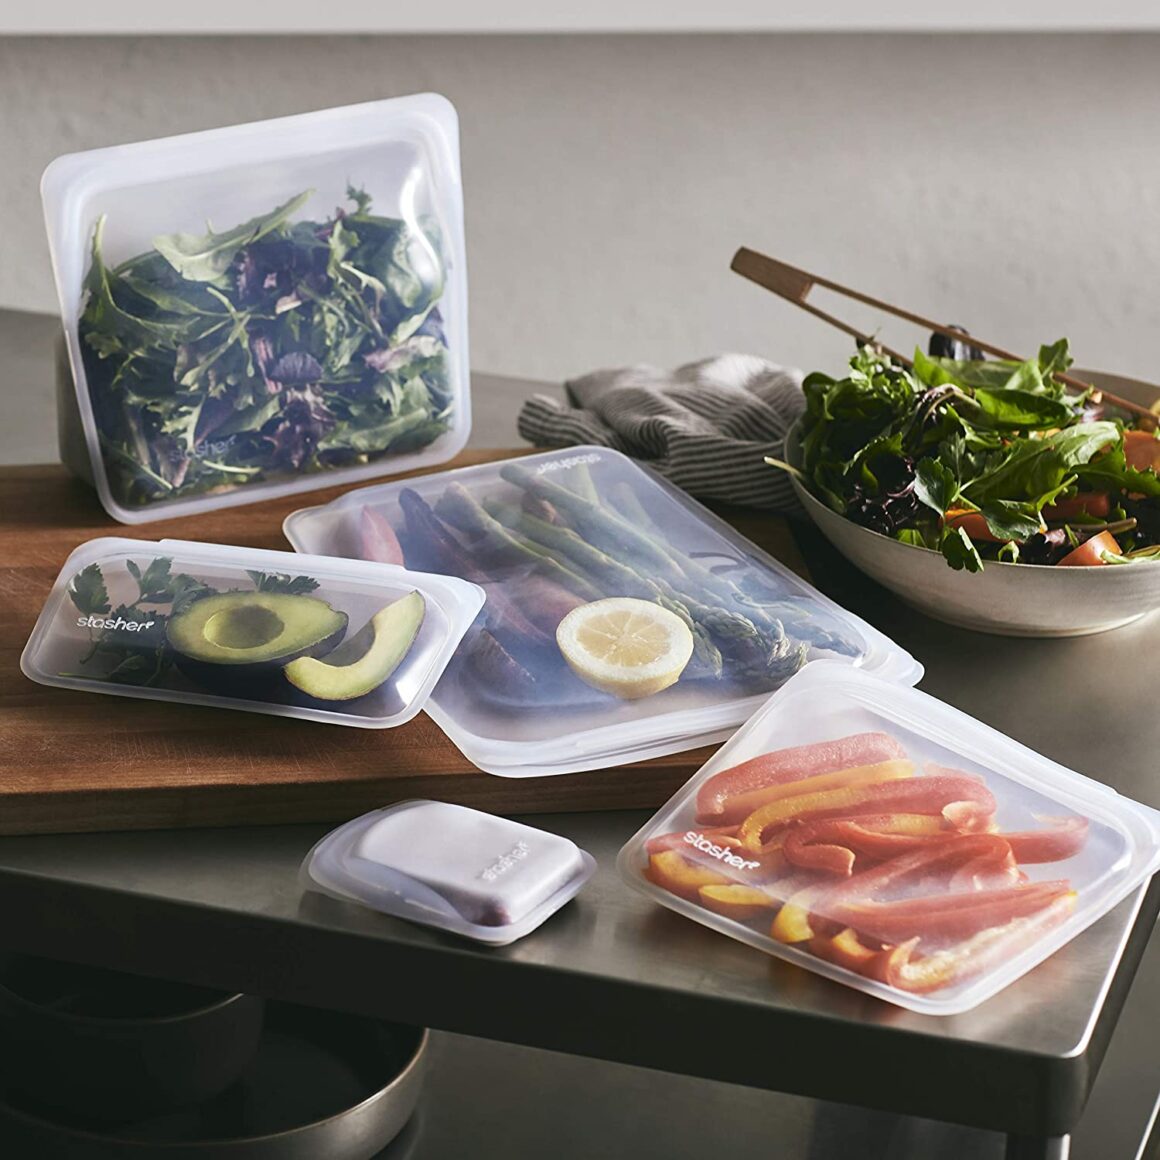 Stasher Bags Are The Best Reusable Silicone Bags for Food Storage in 2020